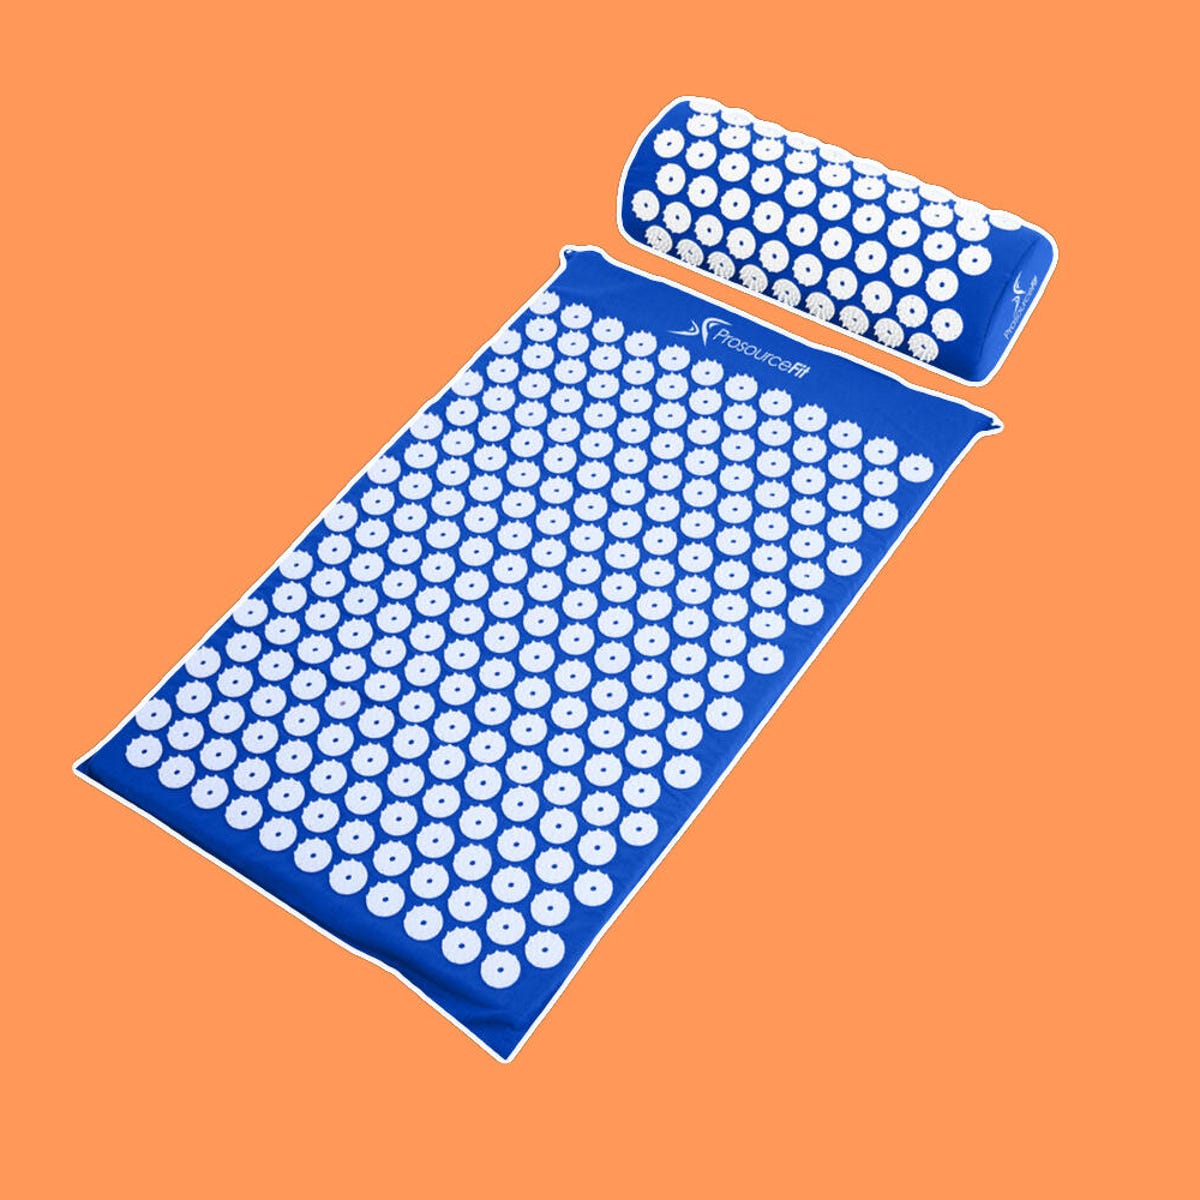 Acupressure mats: What you need to know before you buy one - CNET